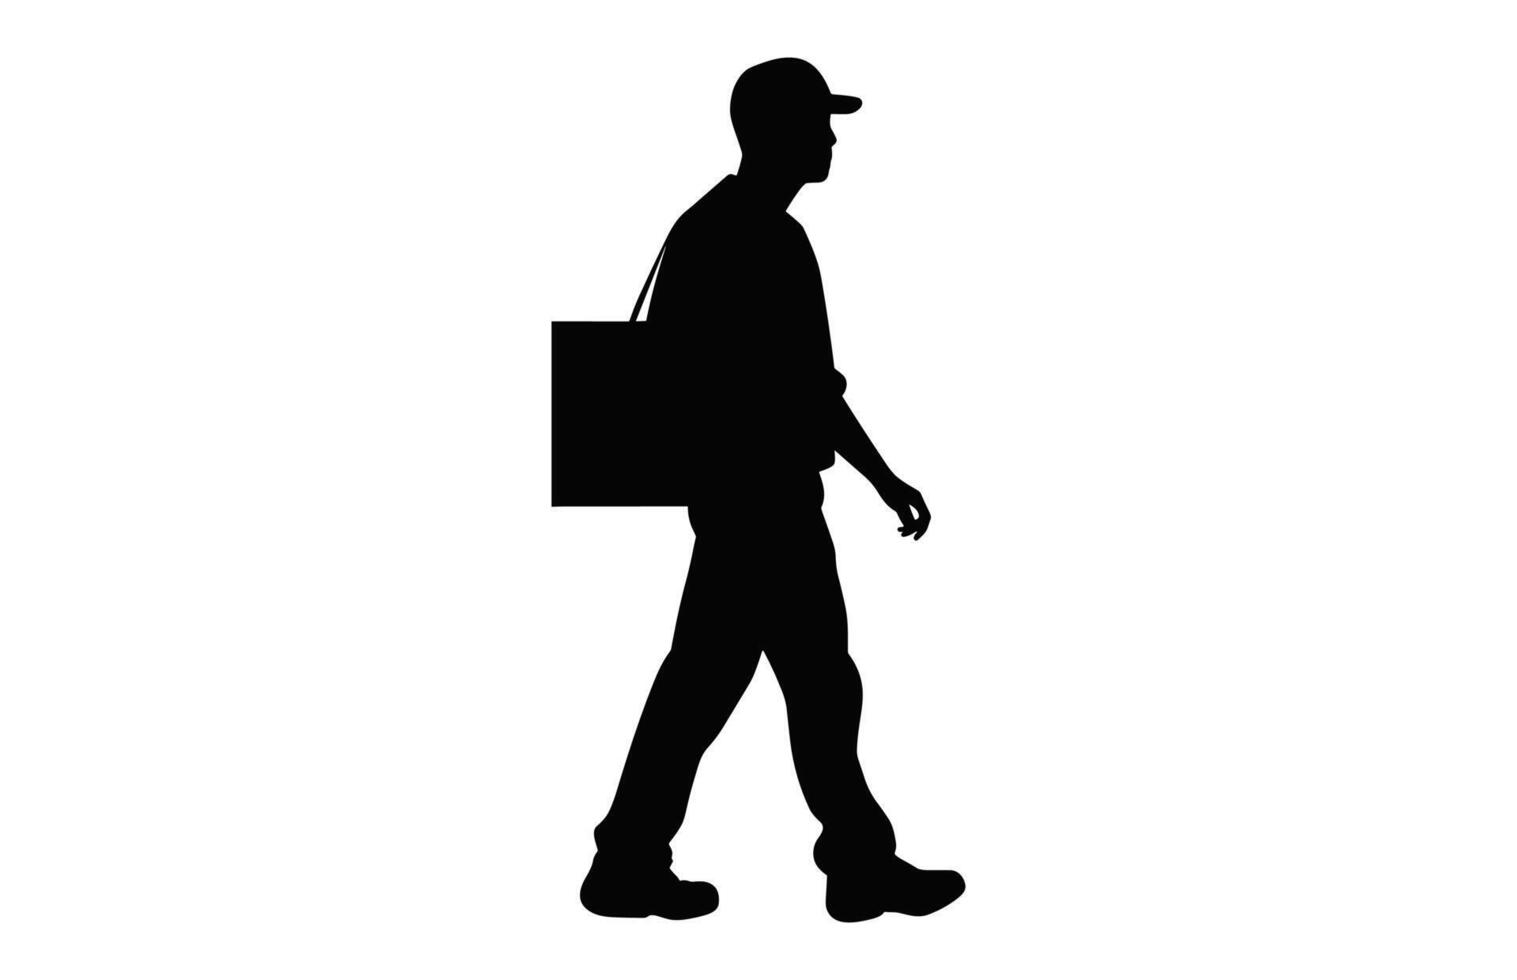 Courier Service with package Silhouette isolated on a white background, A Delivery Man carrying a box black Vector